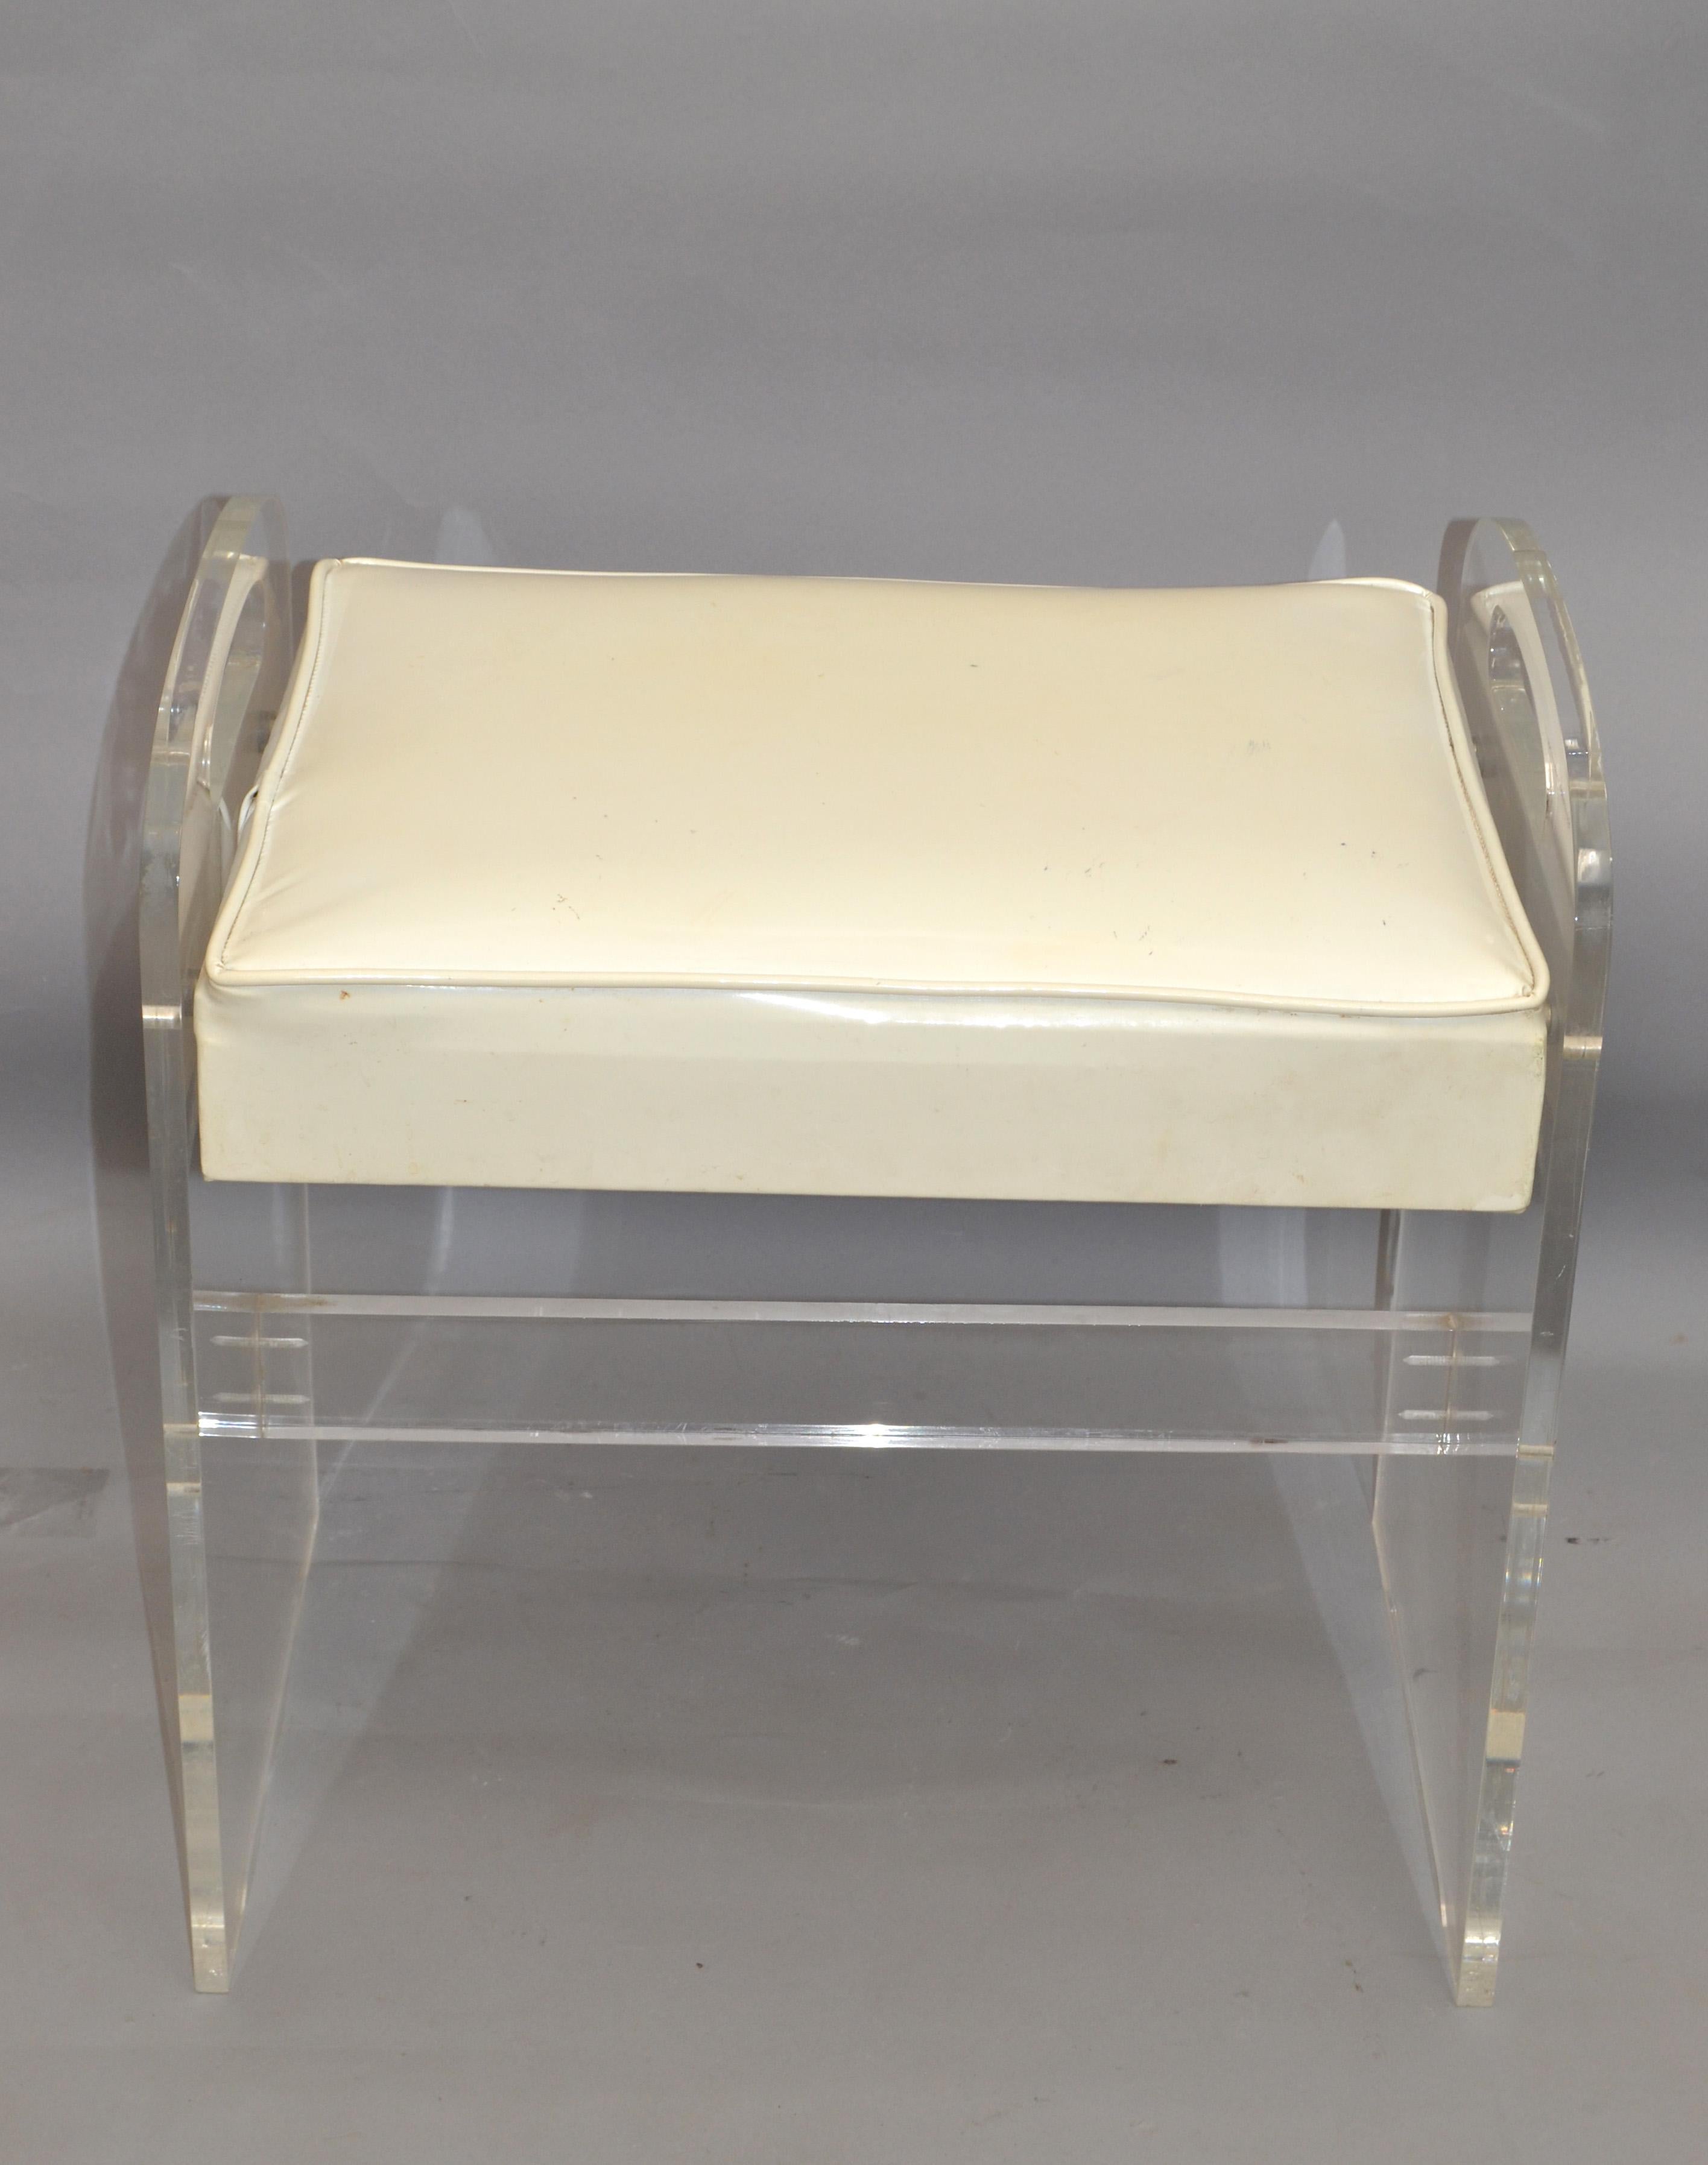 Sculptural Mid-Century Modern Lucite stool in off white vinyl seat and two handles.
This stool can be used as a footstool, vanity stool or a place to put your magazine.
Note the interesting base.
